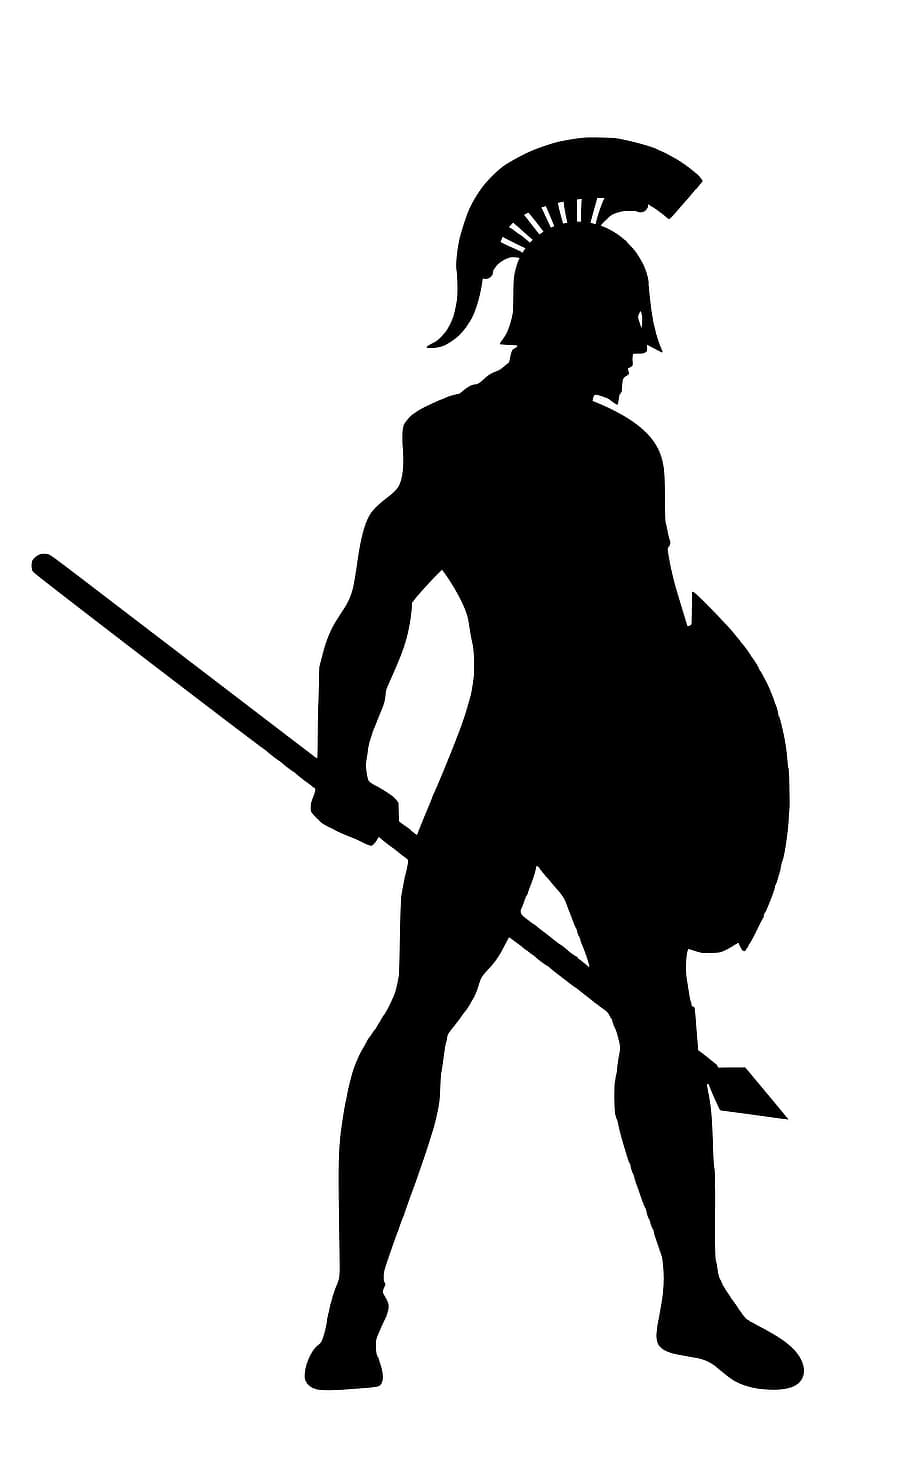 Illustration of spartan in silhouette., army, roman, soldier